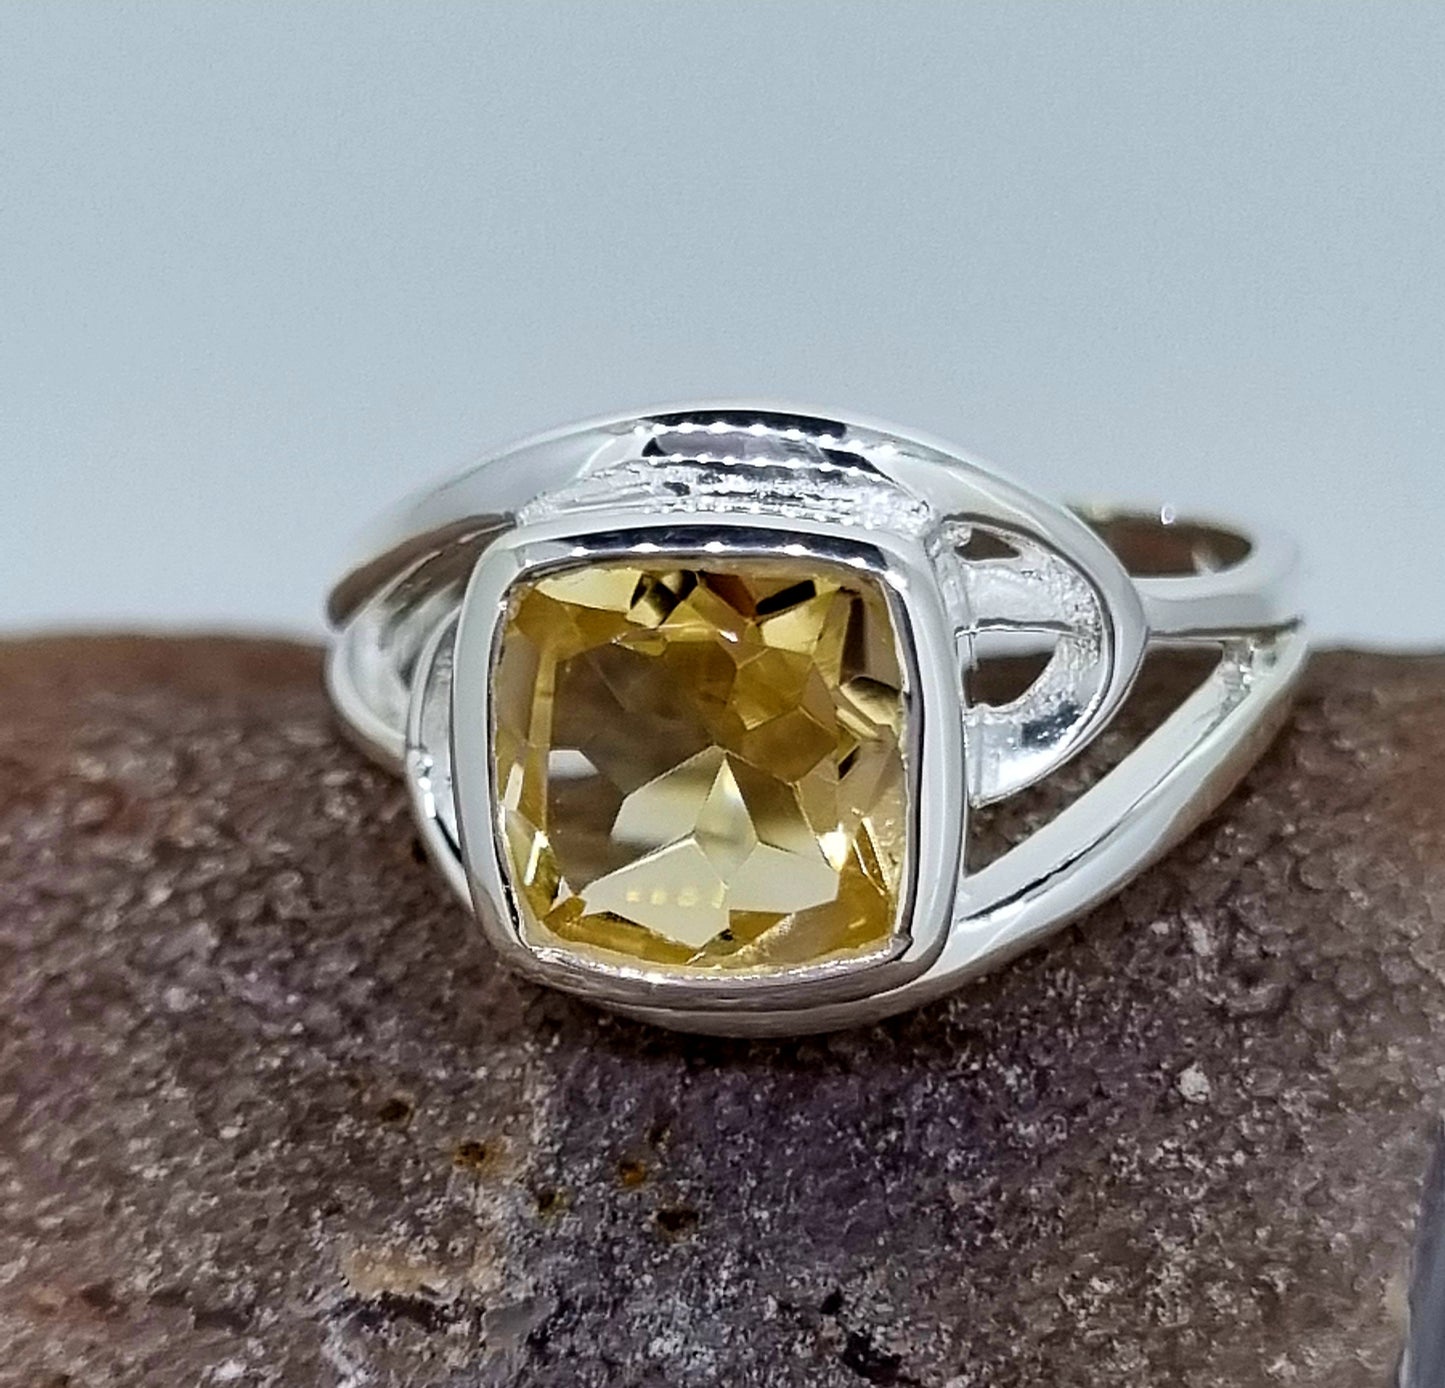 Golden Girl - Citrine Square Gem Intertwined Sterling Silver Ring